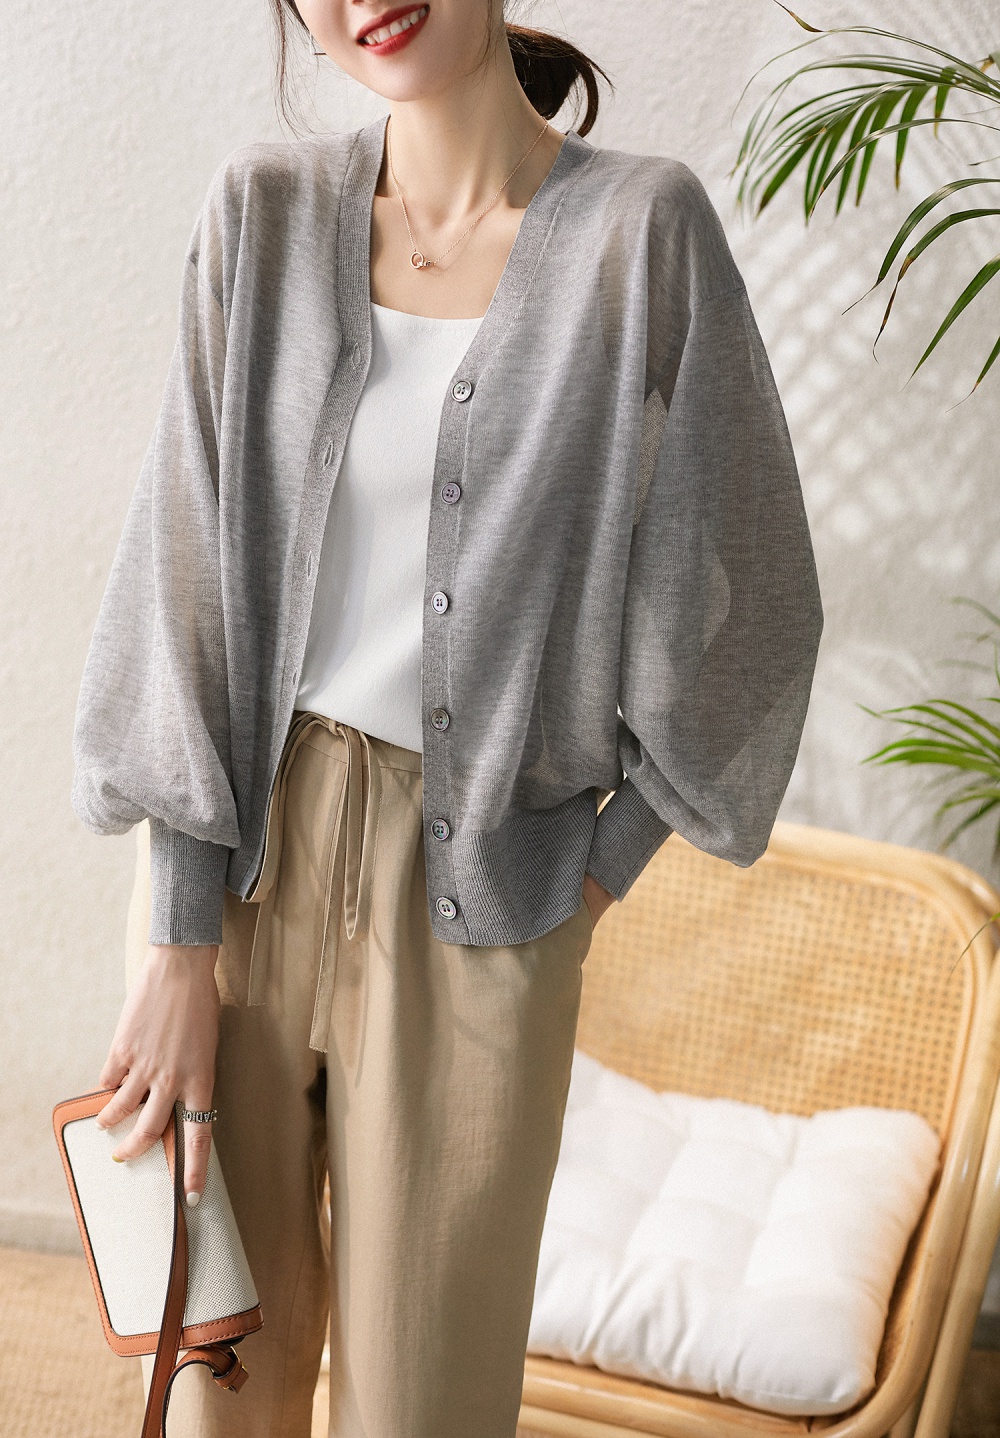 V-neck breathable autumn and winter sweater summer light cardigan